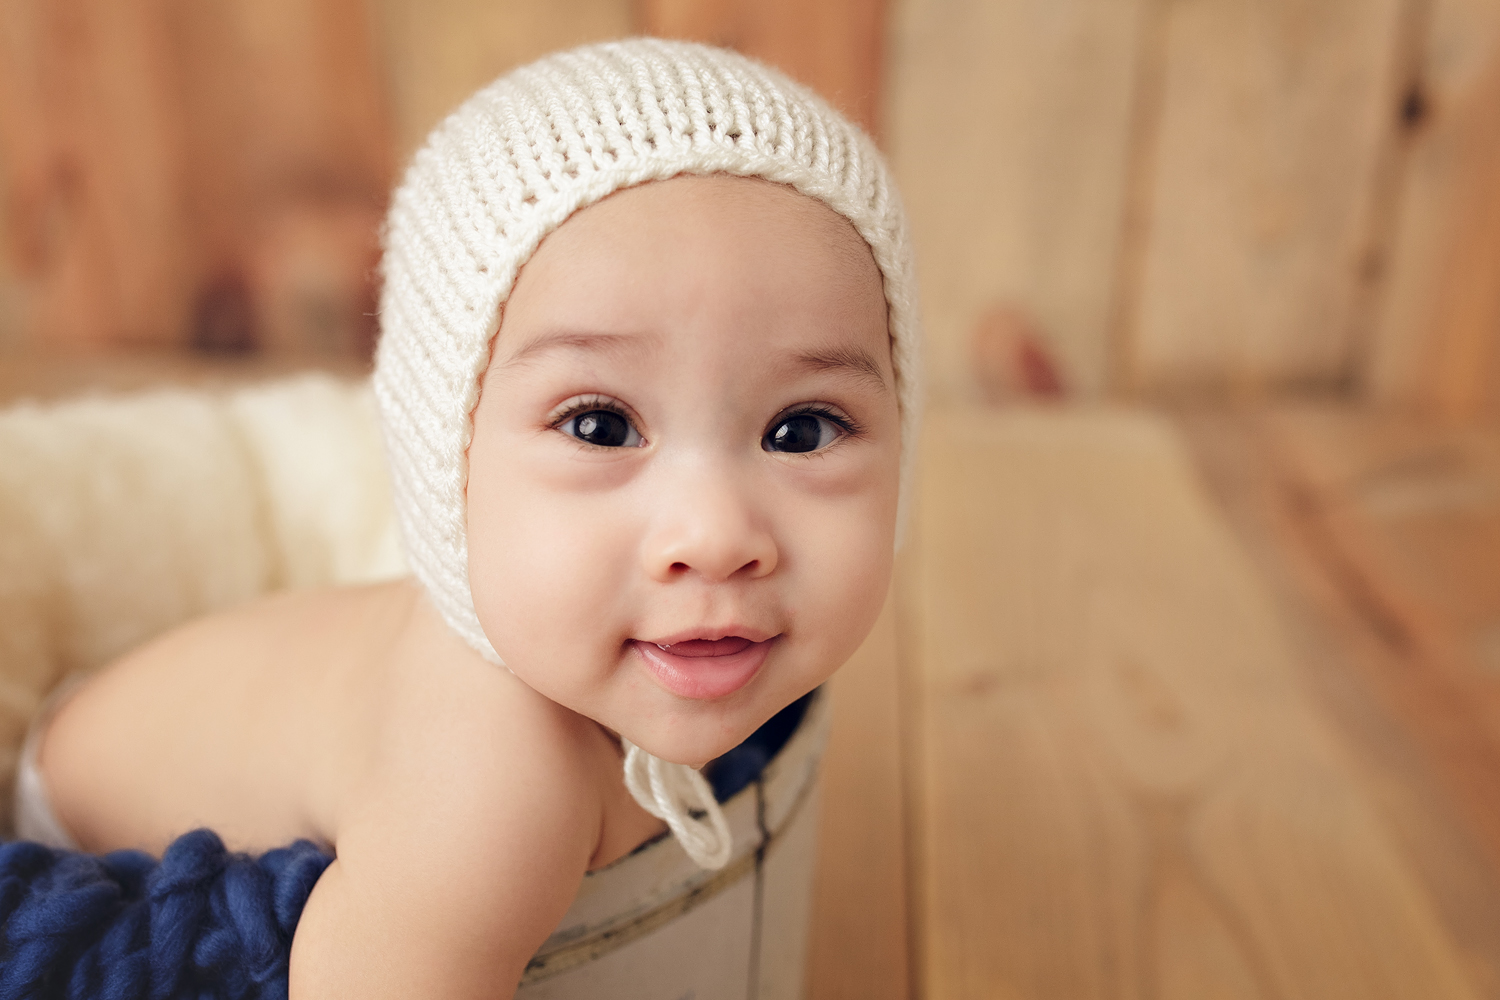 Baby T in a bonnet during his photo shoot is smiling. 